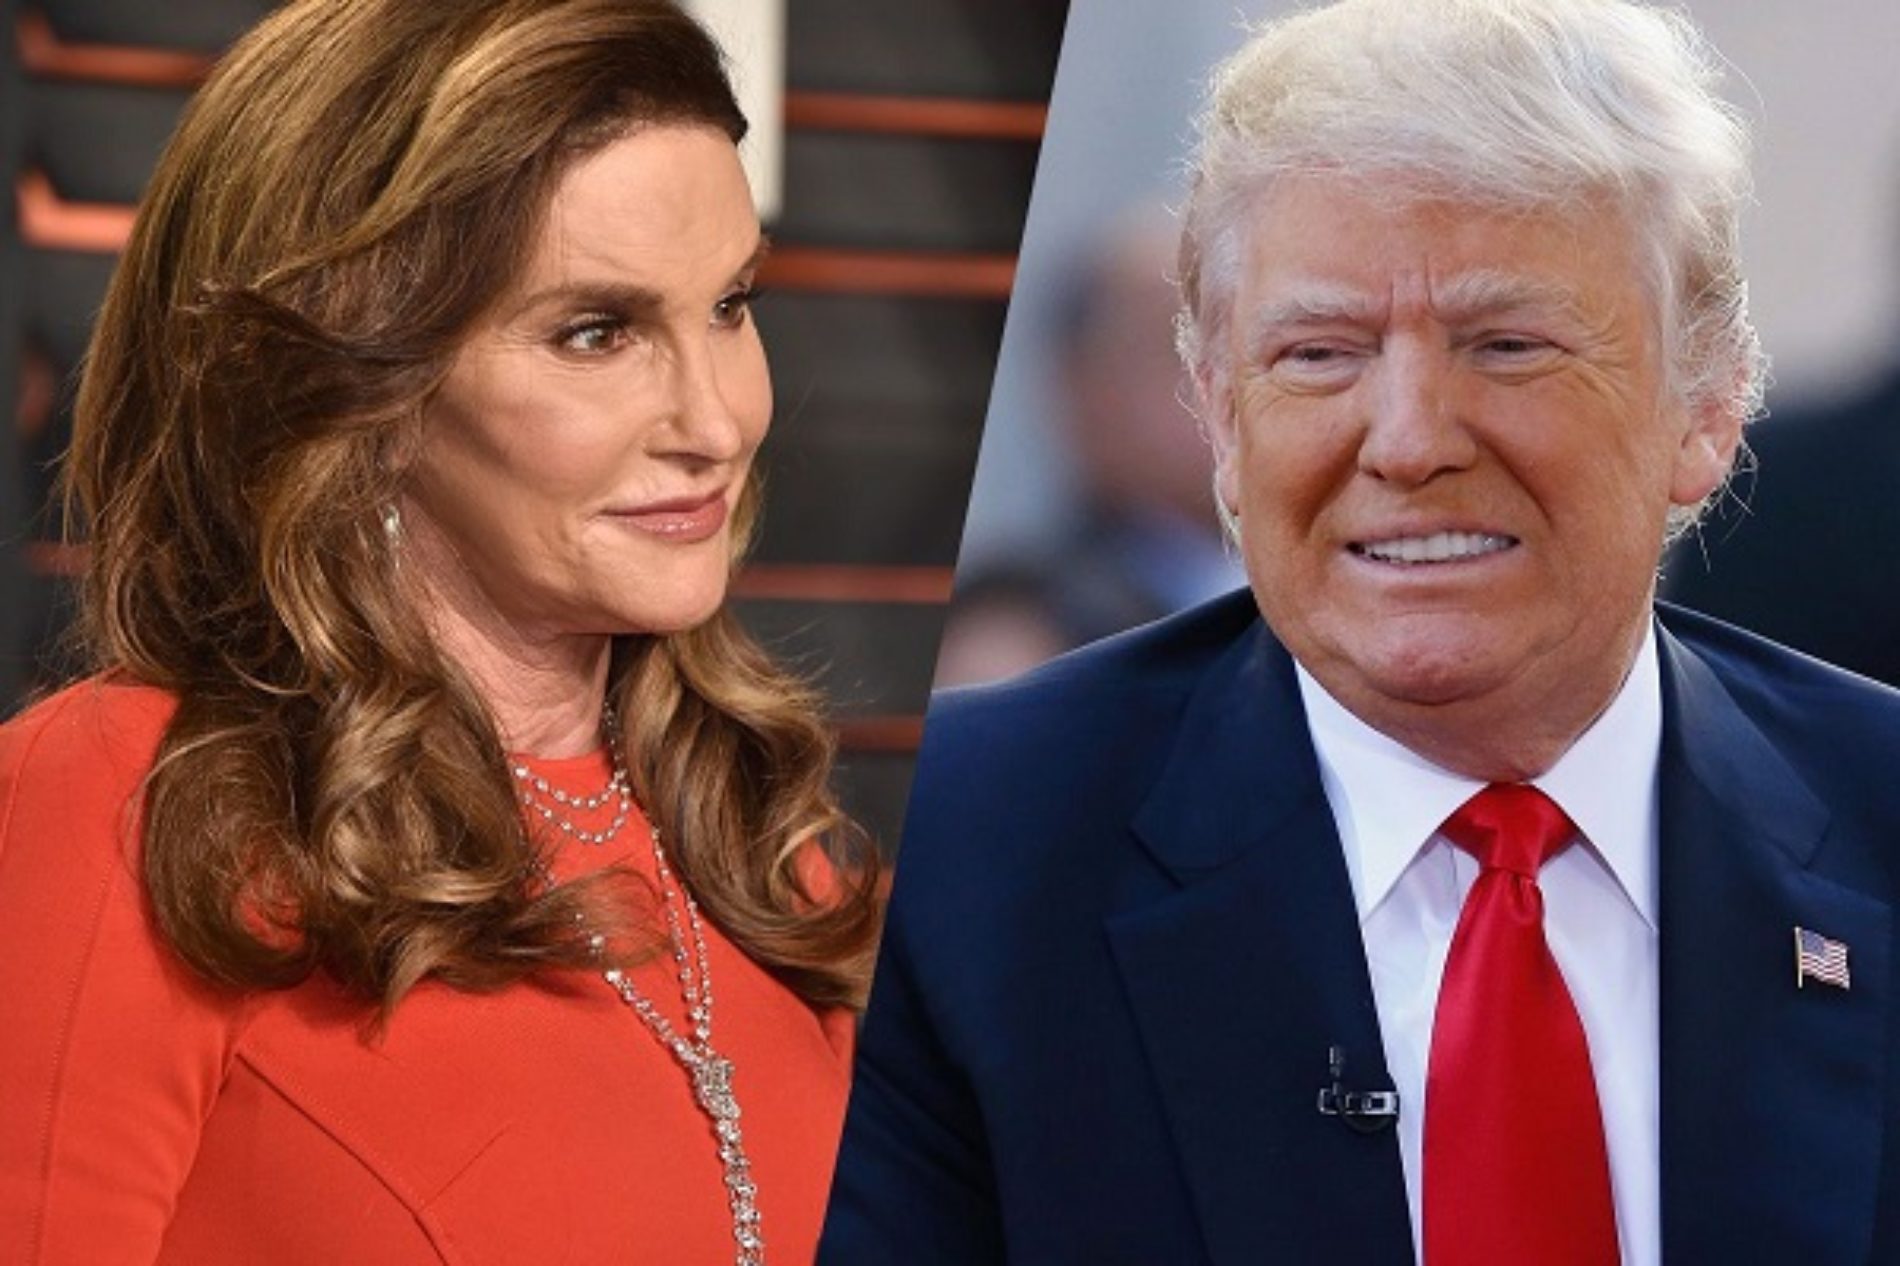 Twitter reacts to Caitlyn Jenner’s outrage over Donald Trump’s trans military ban